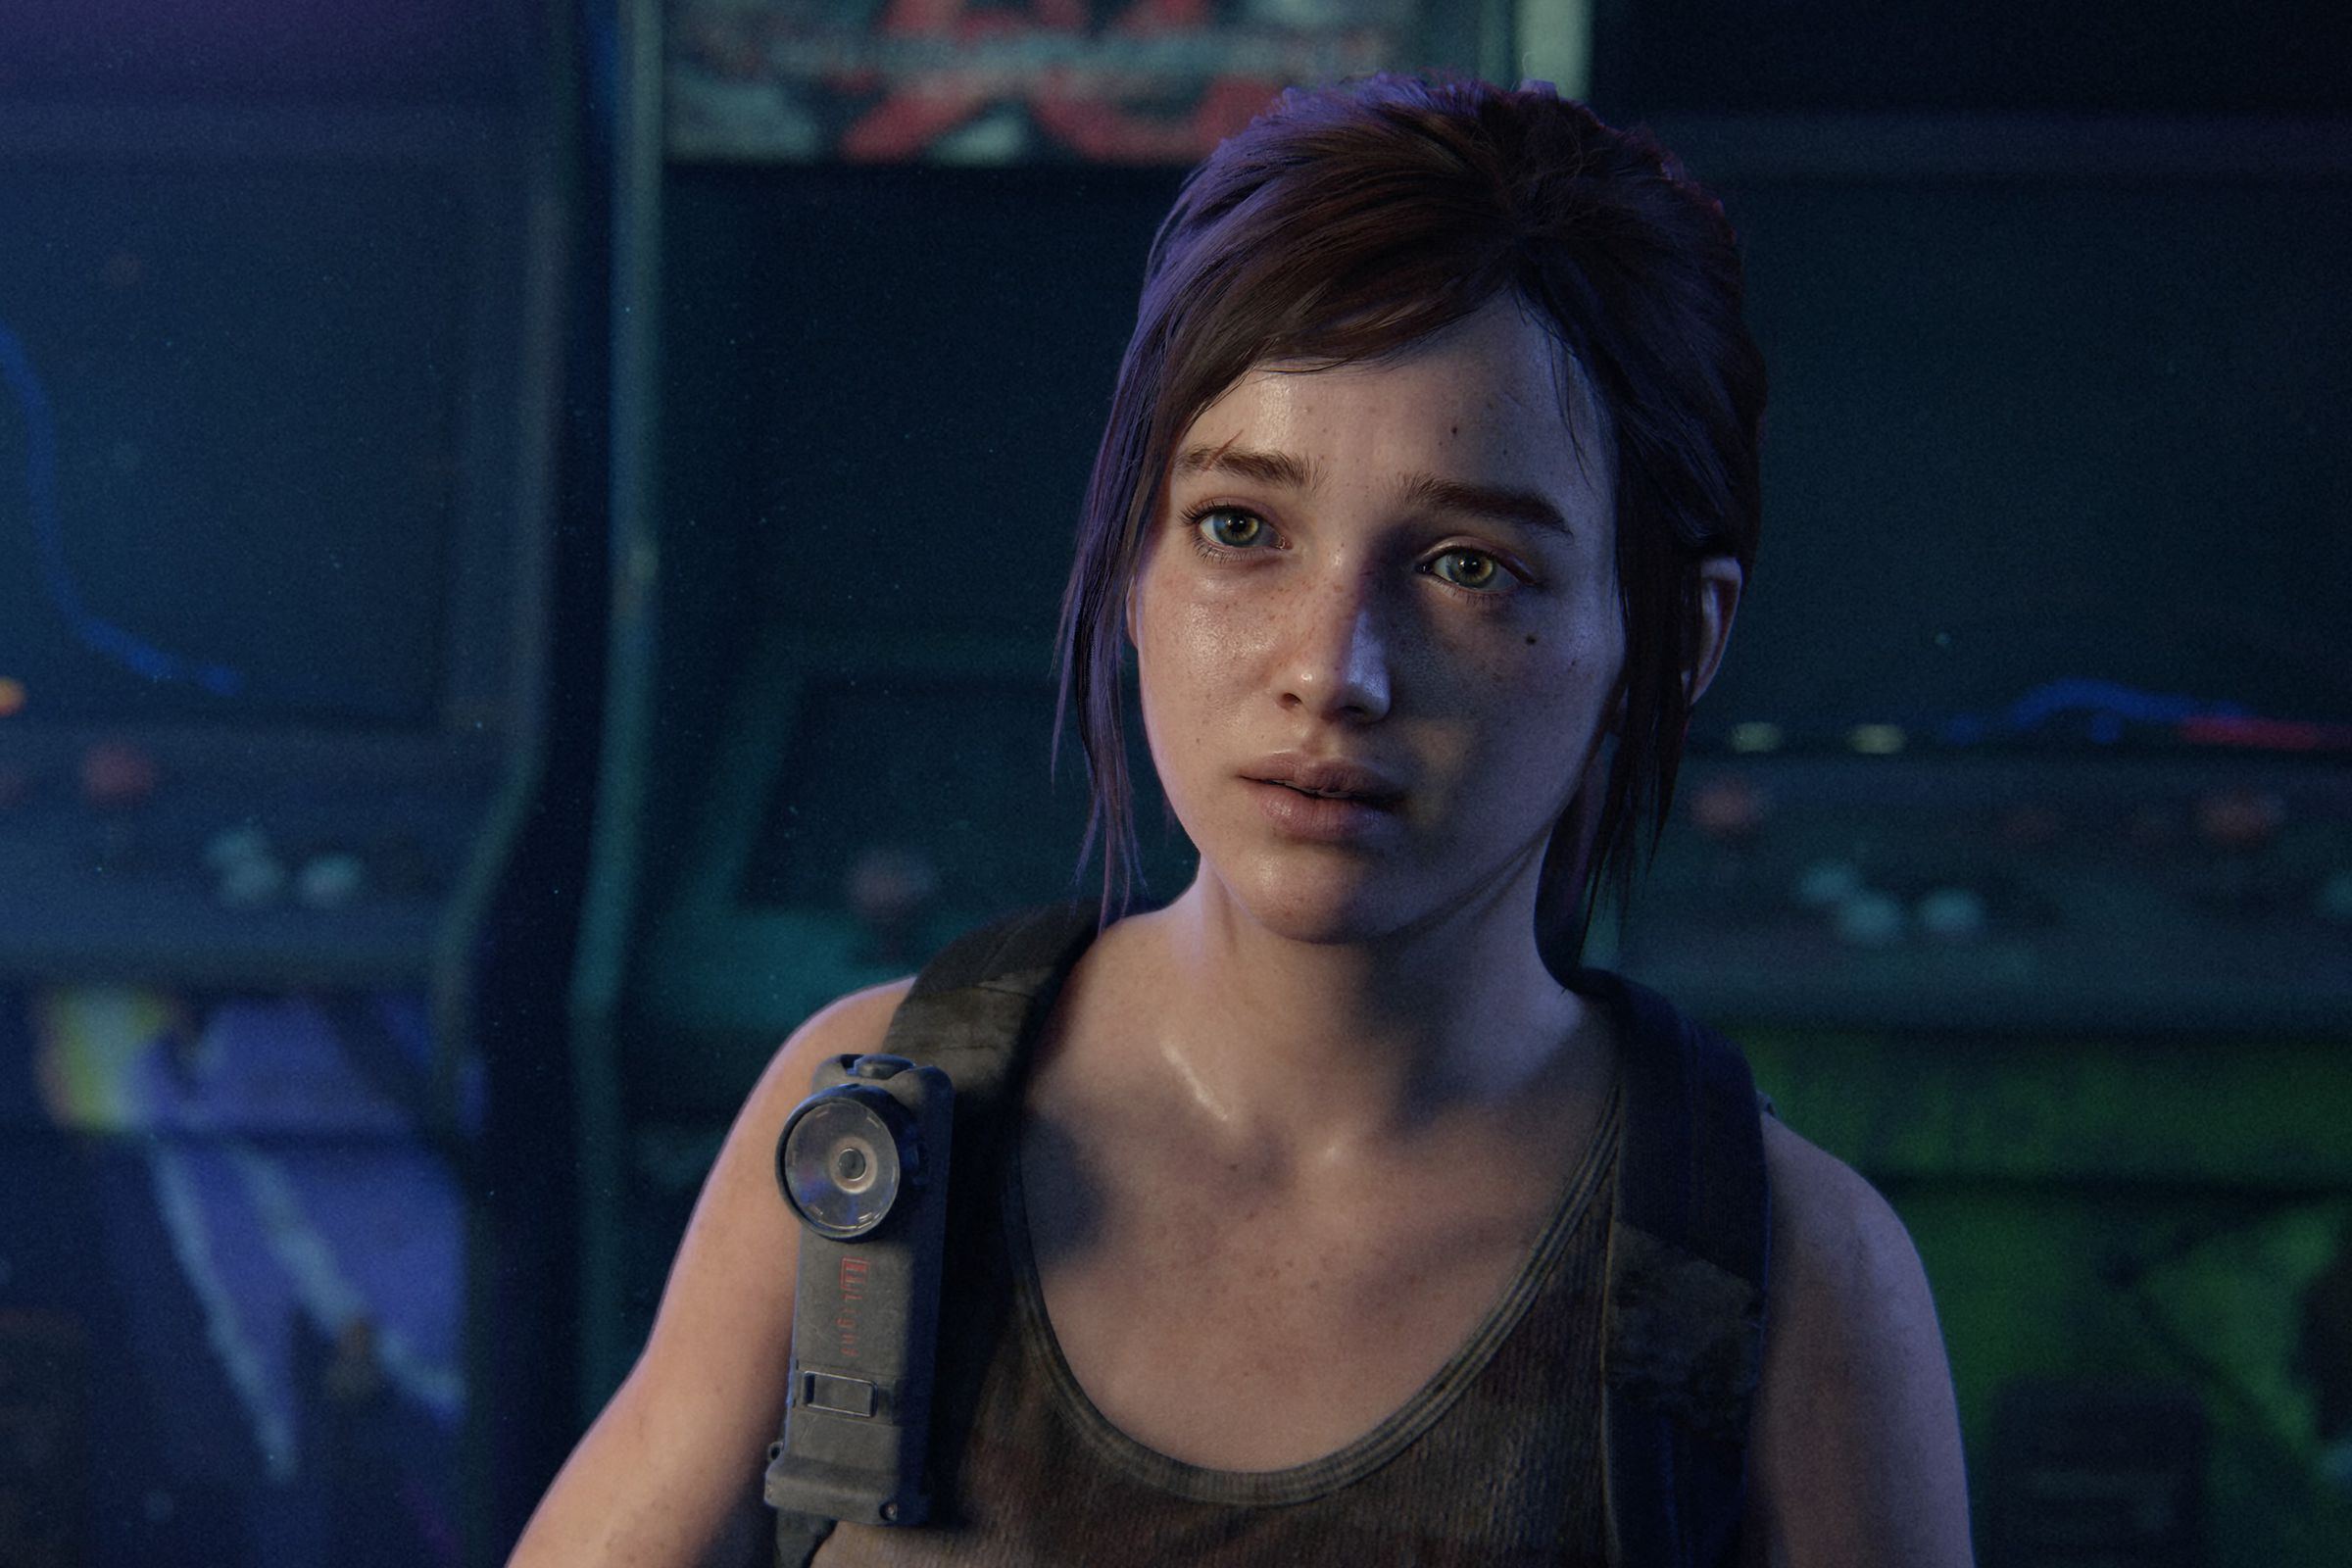 Left Behind is the perfect place to start playing after The Last of Us on HBO